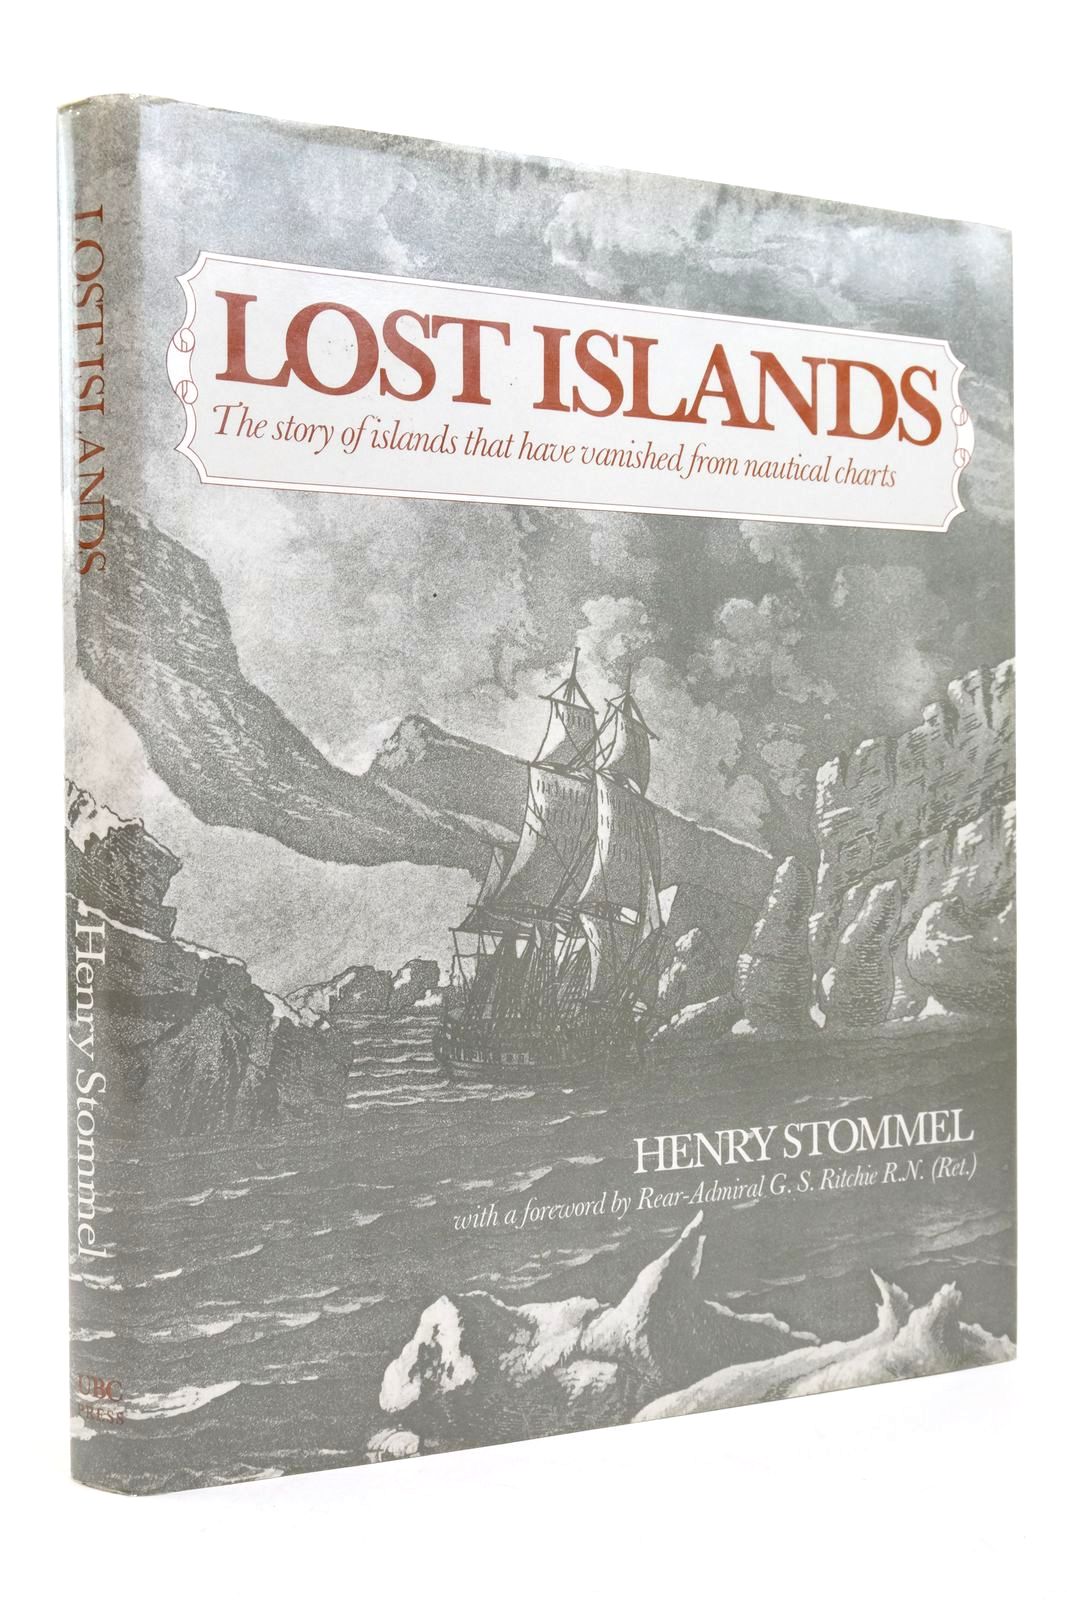 Photo of LOST ISLANDS written by Stommel, Henry published by University of British Columbia (STOCK CODE: 2138630)  for sale by Stella & Rose's Books